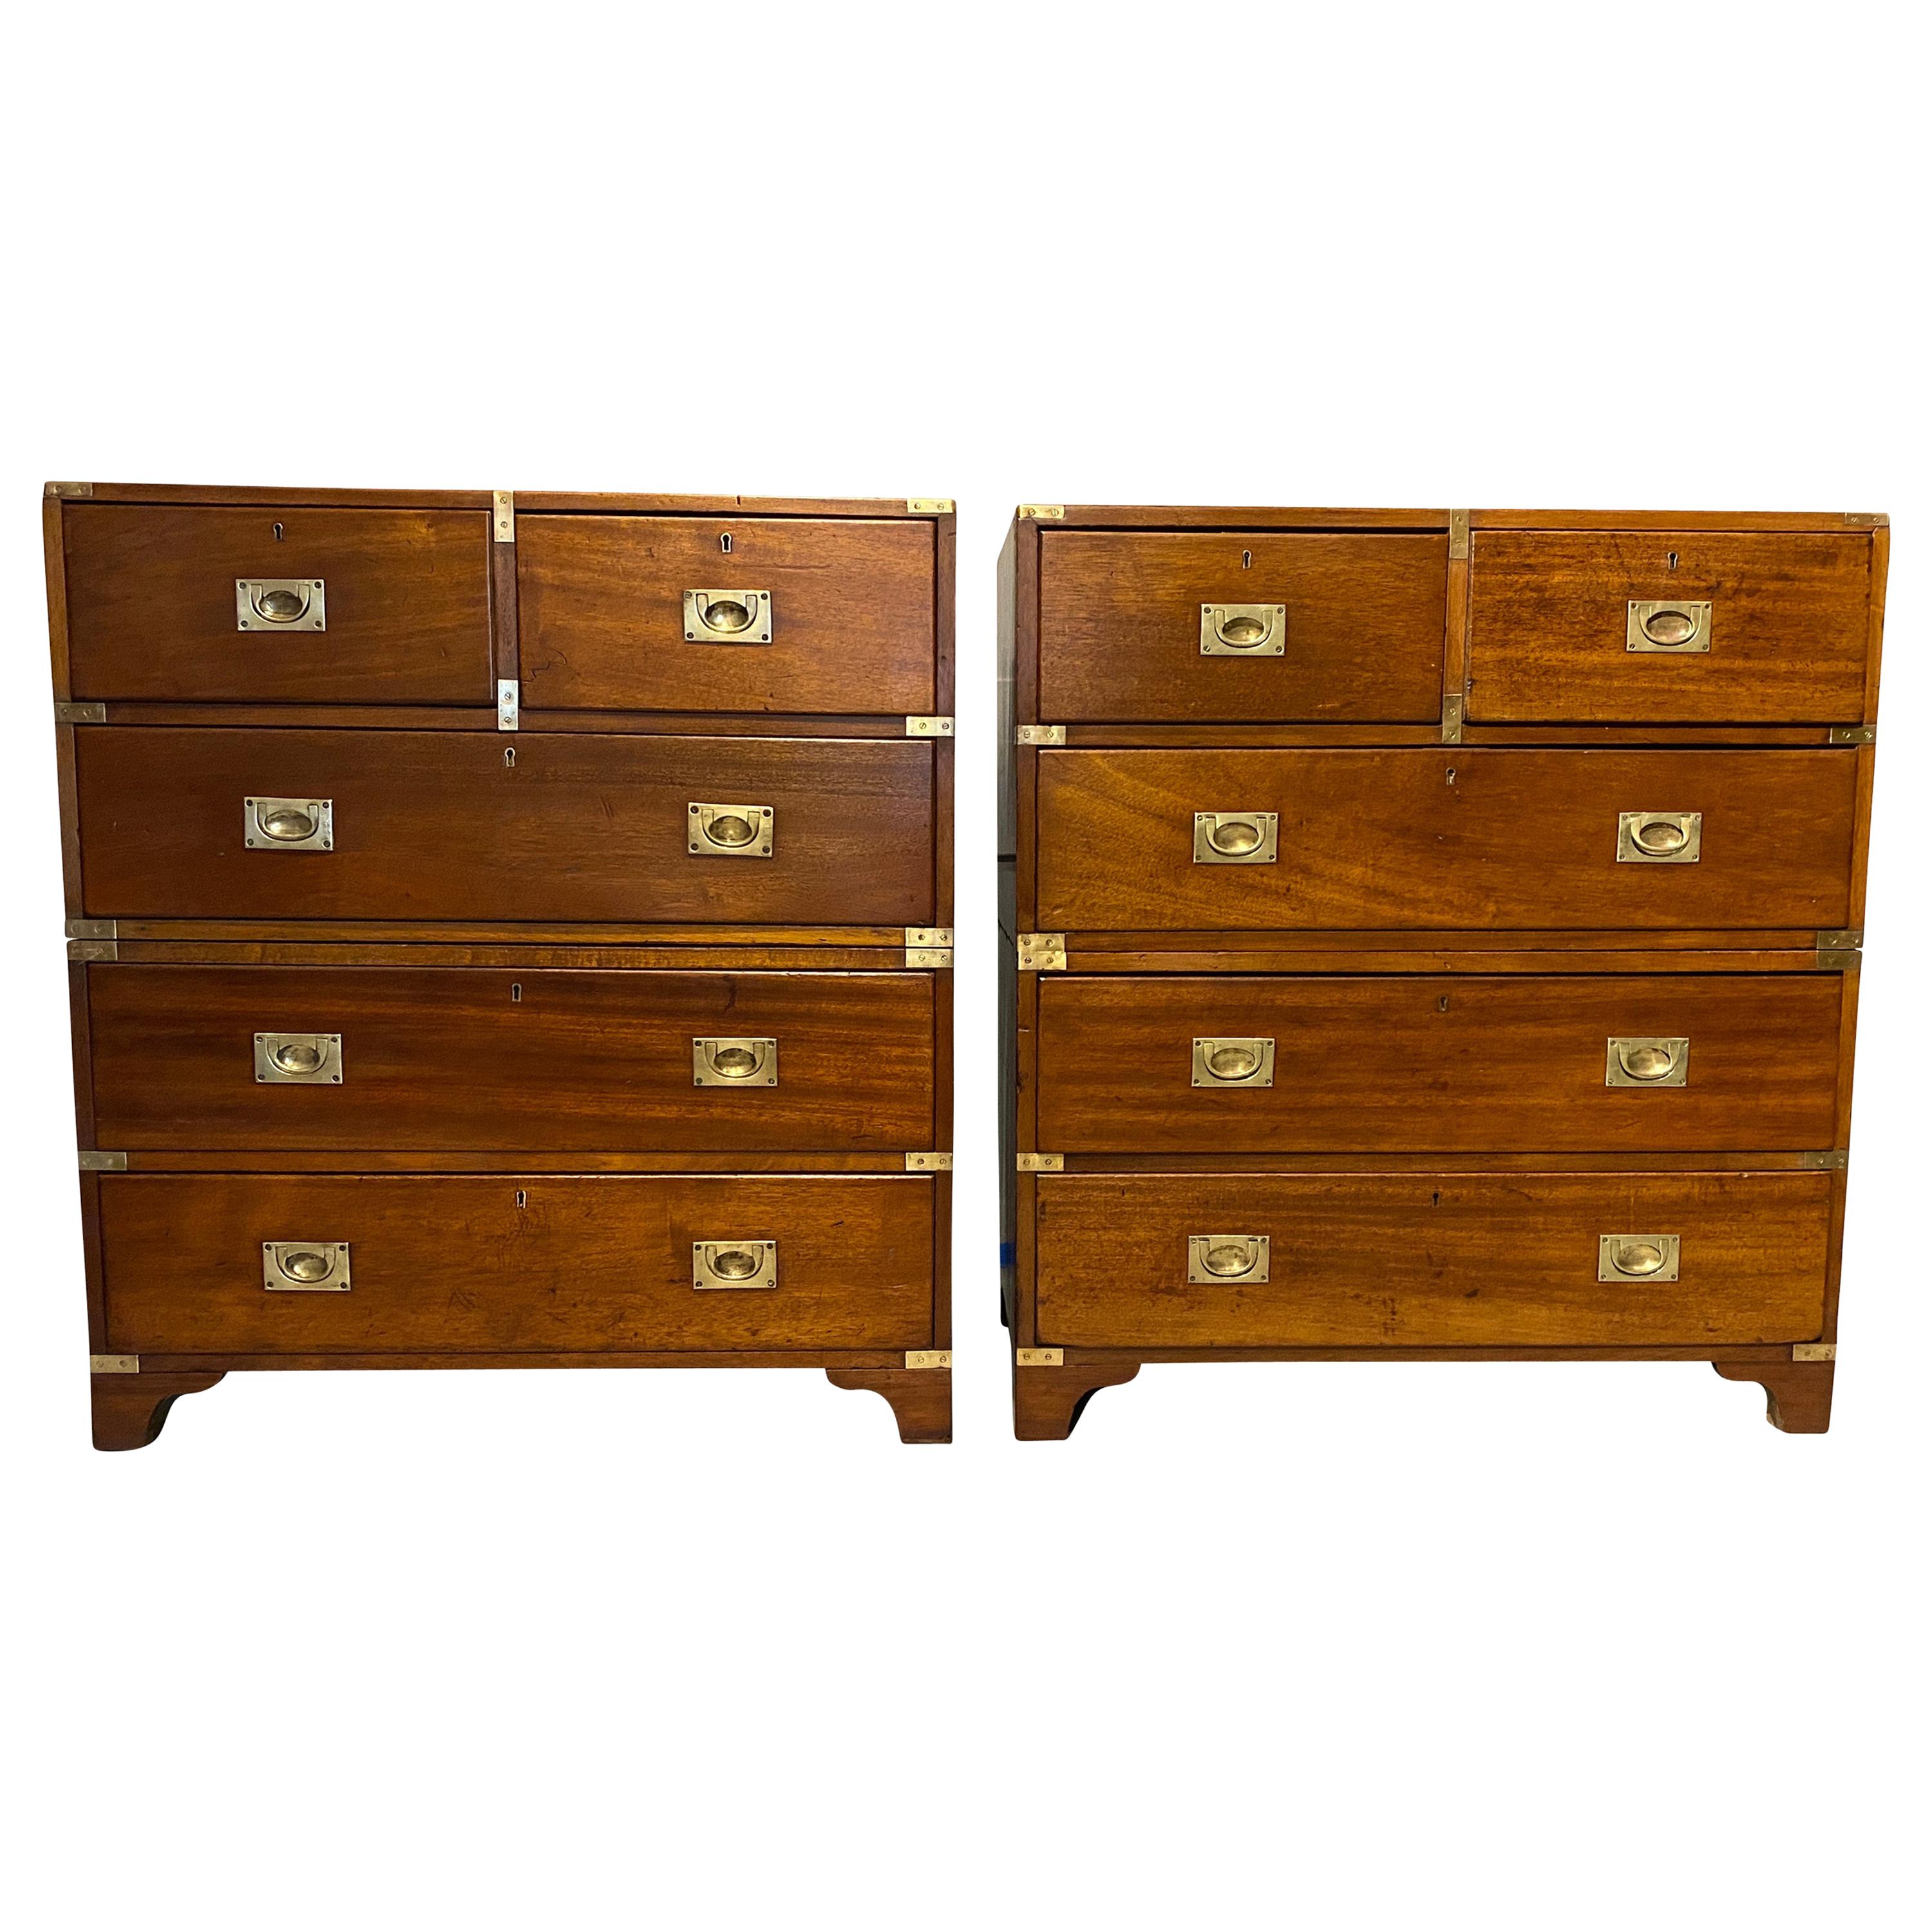 Pair of Victorian Mahogany Campaign Chests